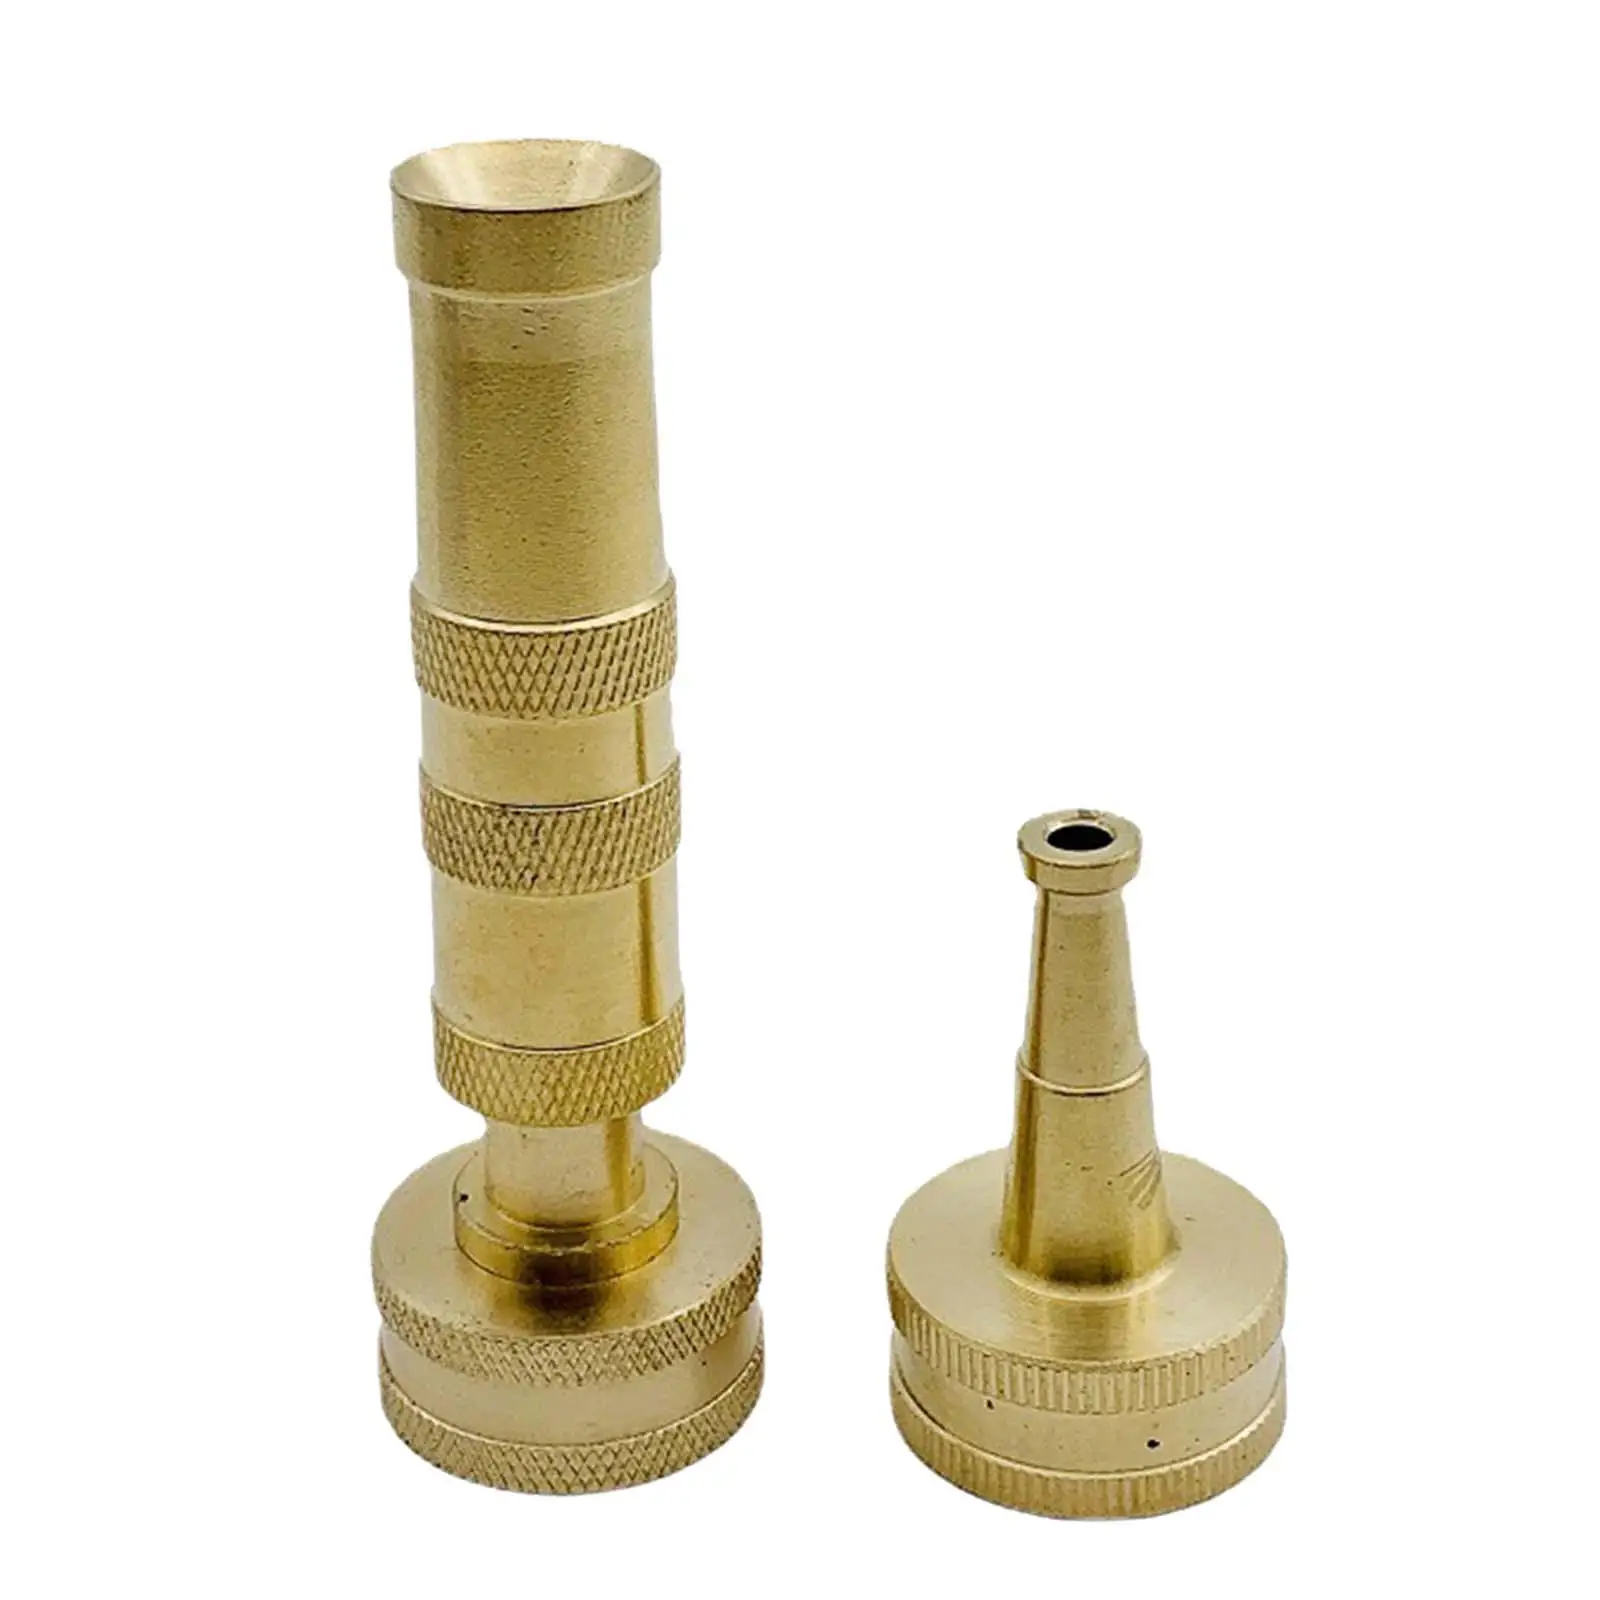 Solid Brass Hose Nozzle High Pressure Hose Nozzle for Yard Watering Car Wash